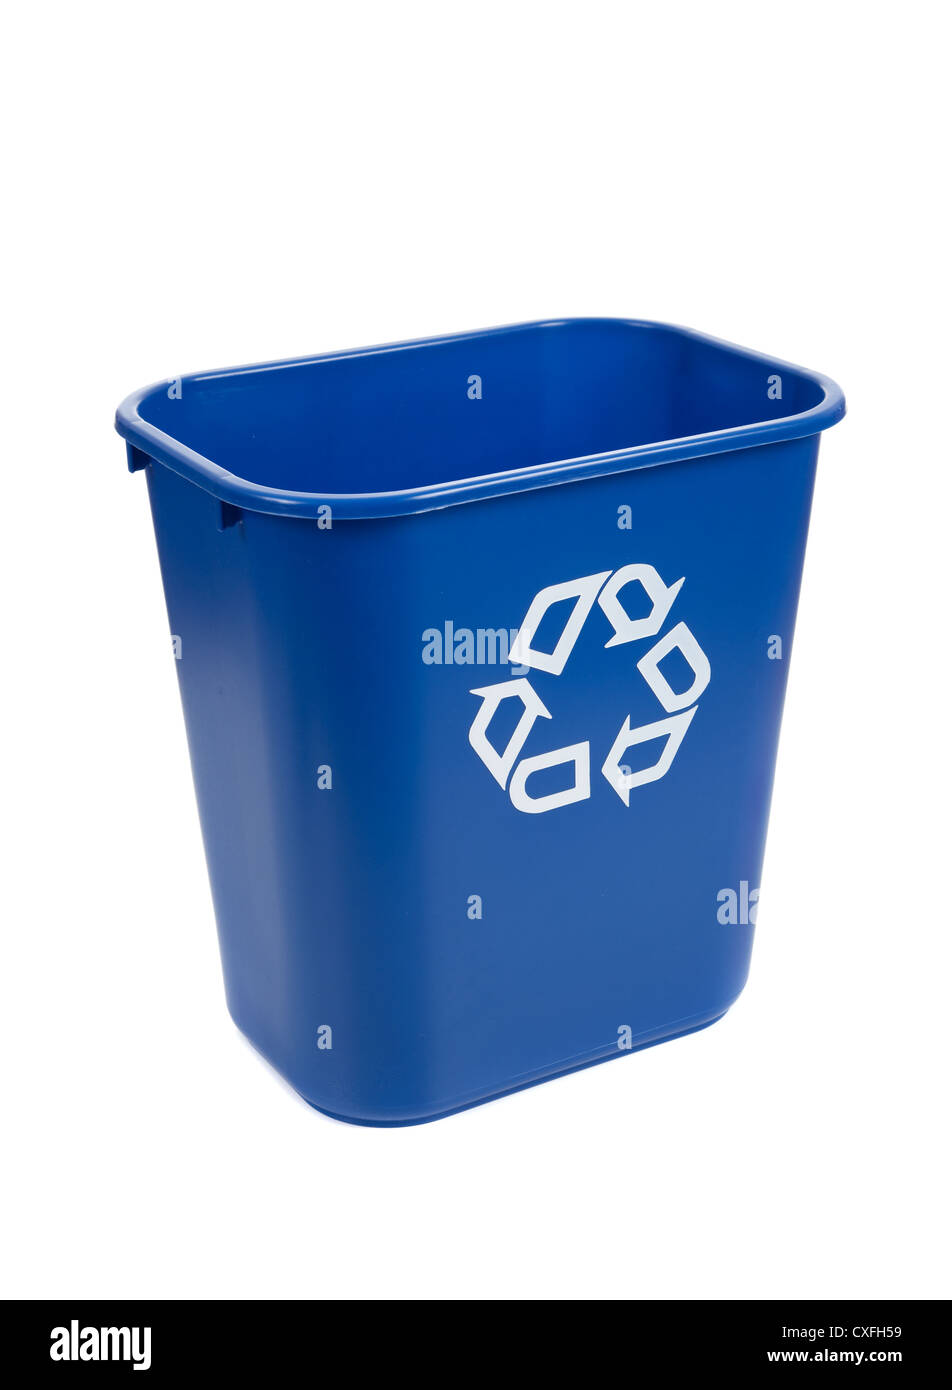 A blue recycle container on a white background Stock Photo